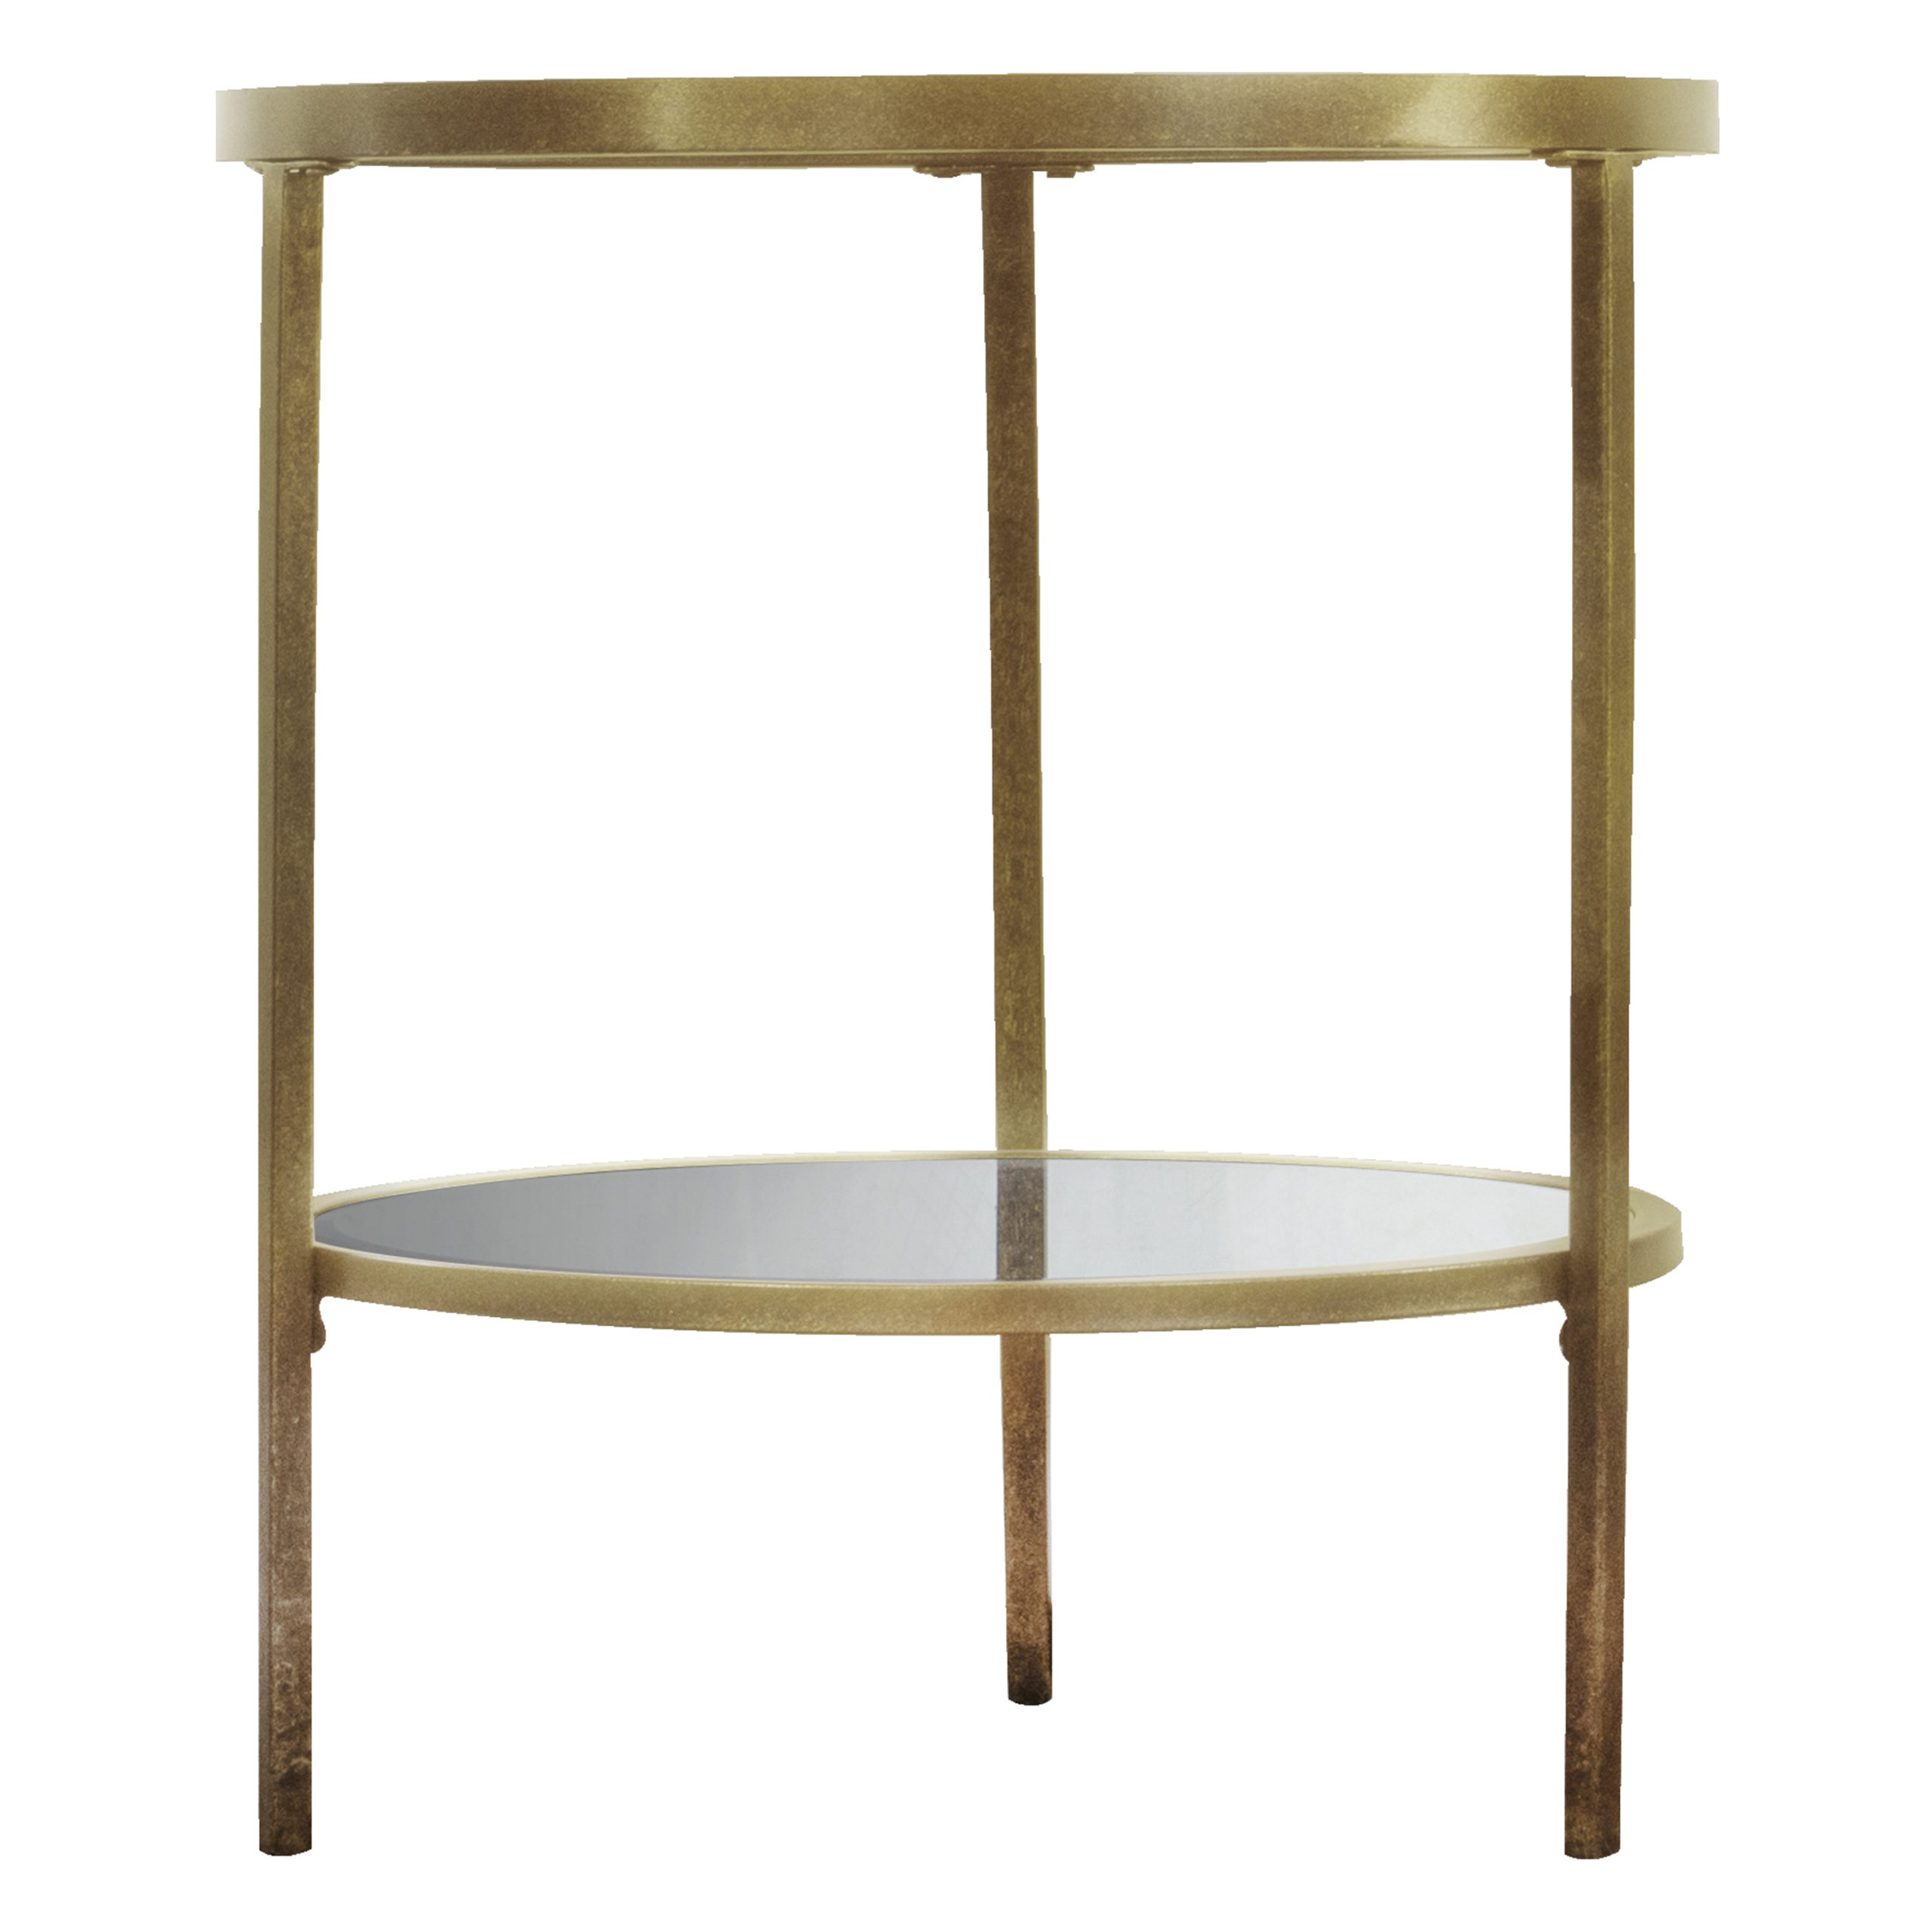 Gallery Direct Hudson Side Table Champagne